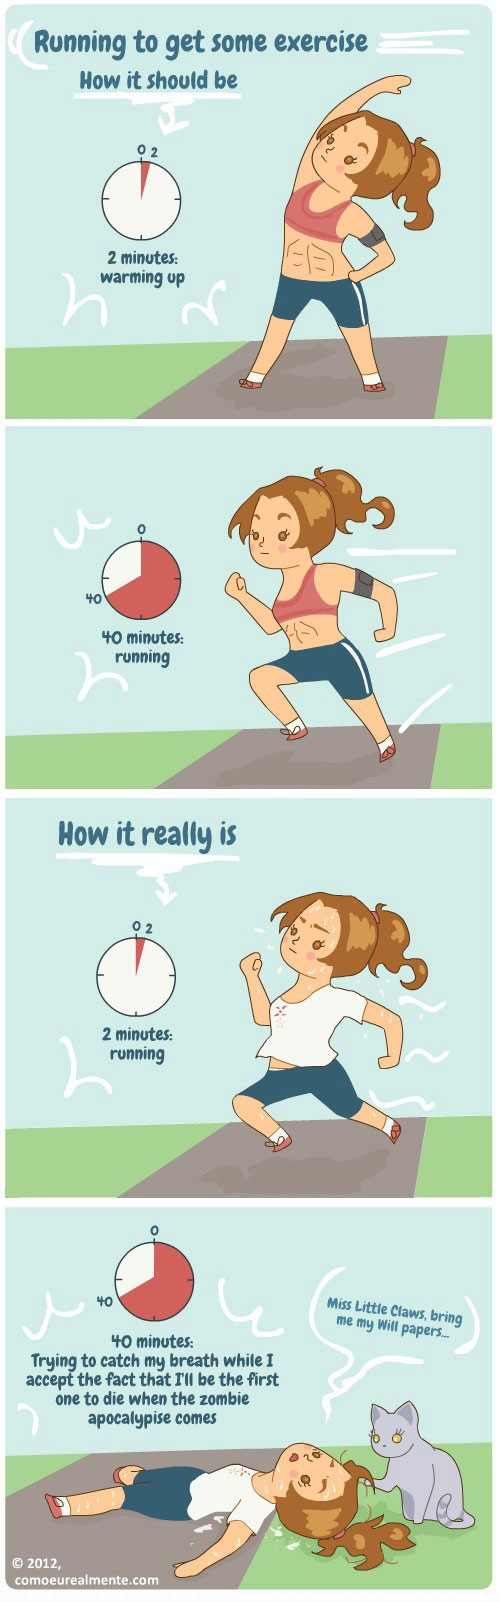 View joke - Running to get some exercise. How it should be: 2 minutes warm-up, 40 minutes running. How it really is: 2 minutes running, 40 minutes trying to catch up my breath while I accept the fact that I'll be the first one to die if a zombie apocalypse comes